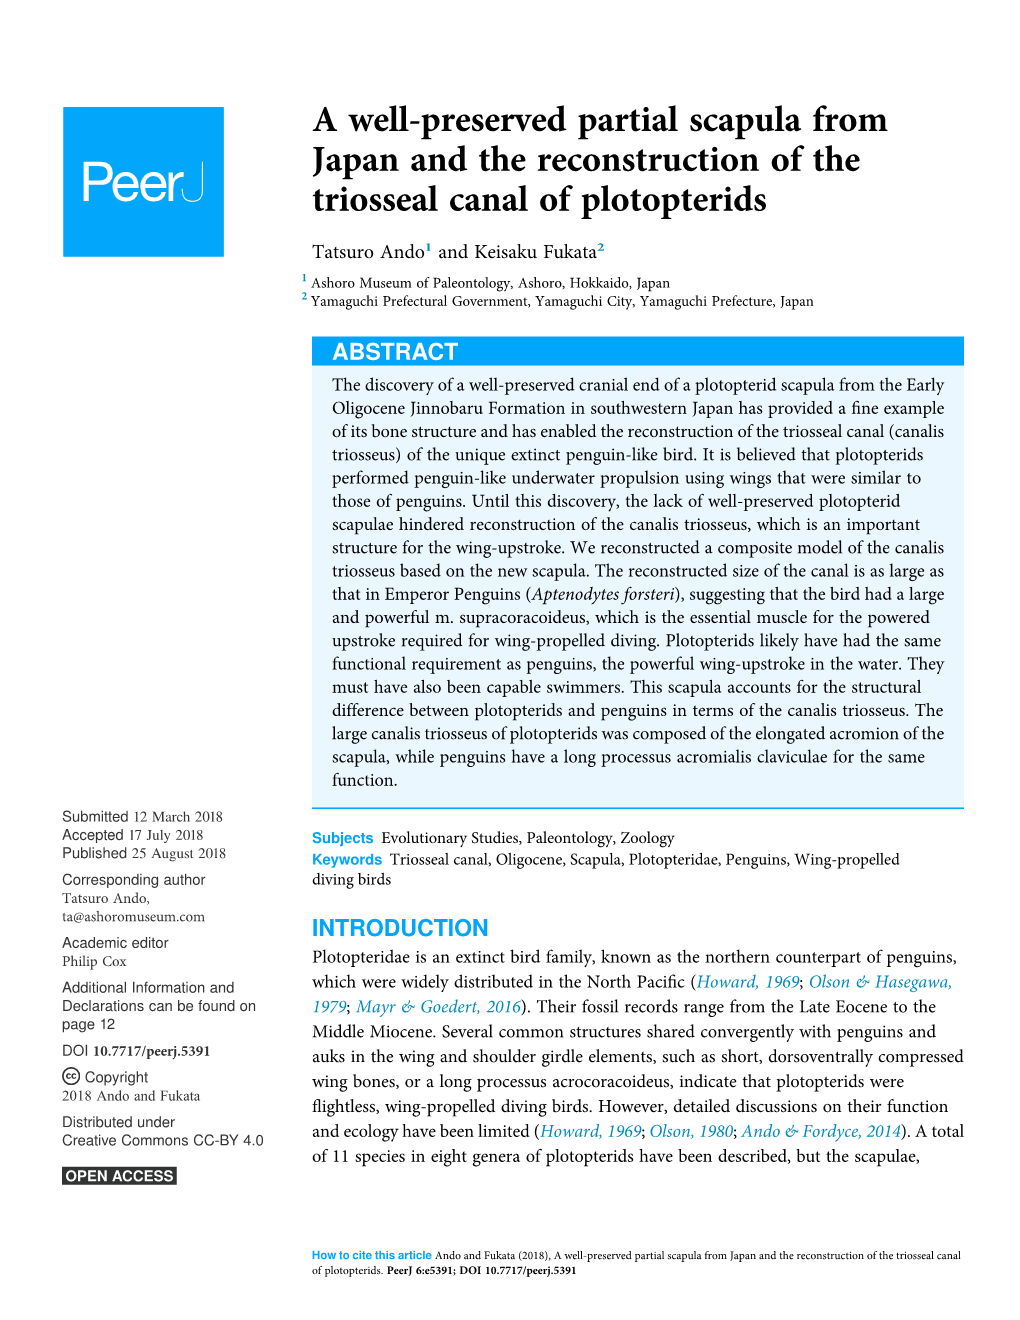 A Well-Preserved Partial Scapula from Japan and the Reconstruction of the Triosseal Canal of Plotopterids